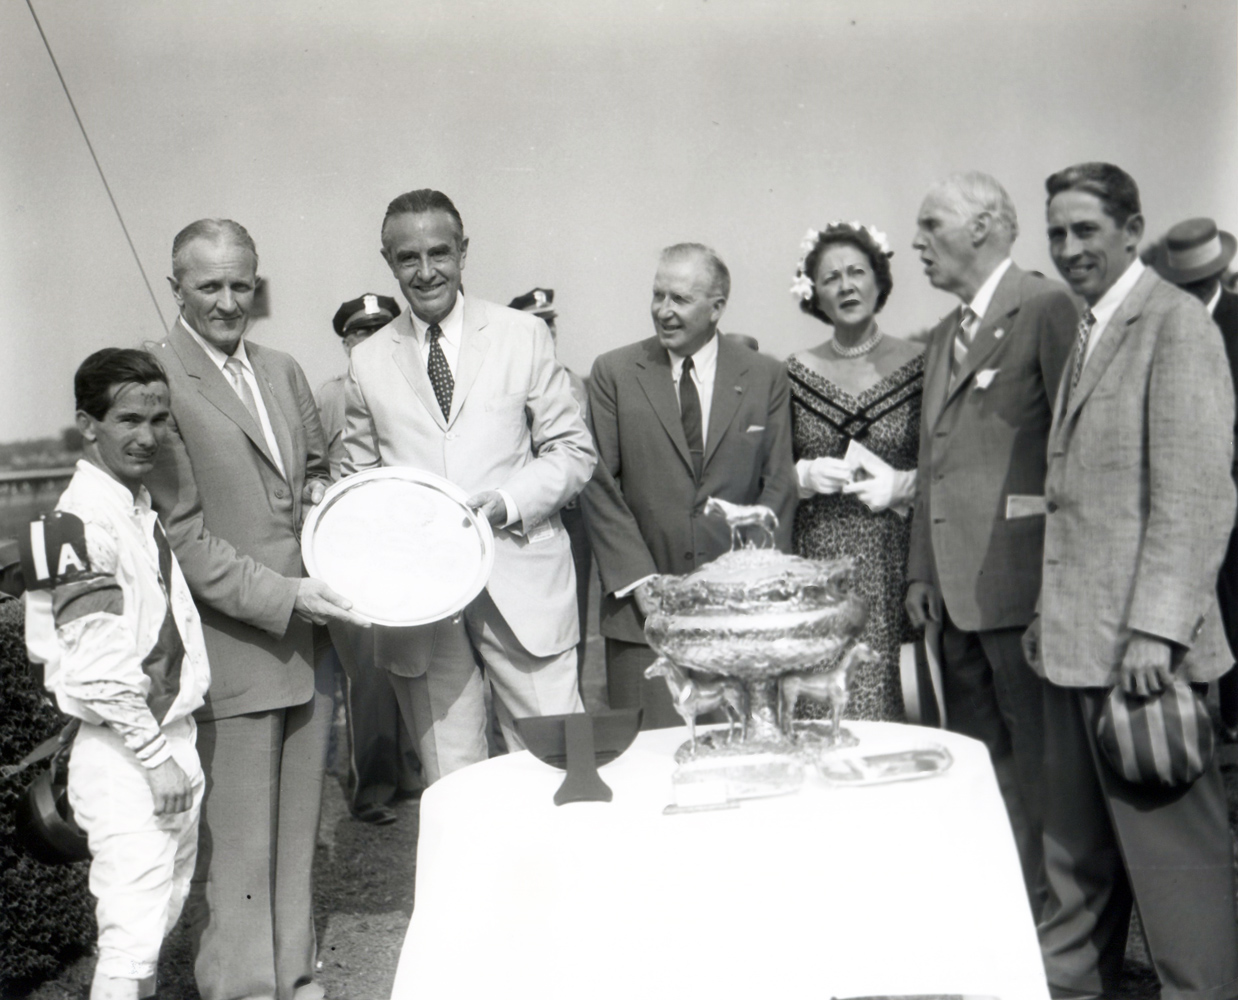 New York Governor Averill Harriman presents jockey Bill Shoemaker at far left, owner Ralph Lowe next to him, and trainer John Nerud at far right with the 1957 Belmont Stakes trophy (Keeneland Library Morgan Collection/Museum Collection)